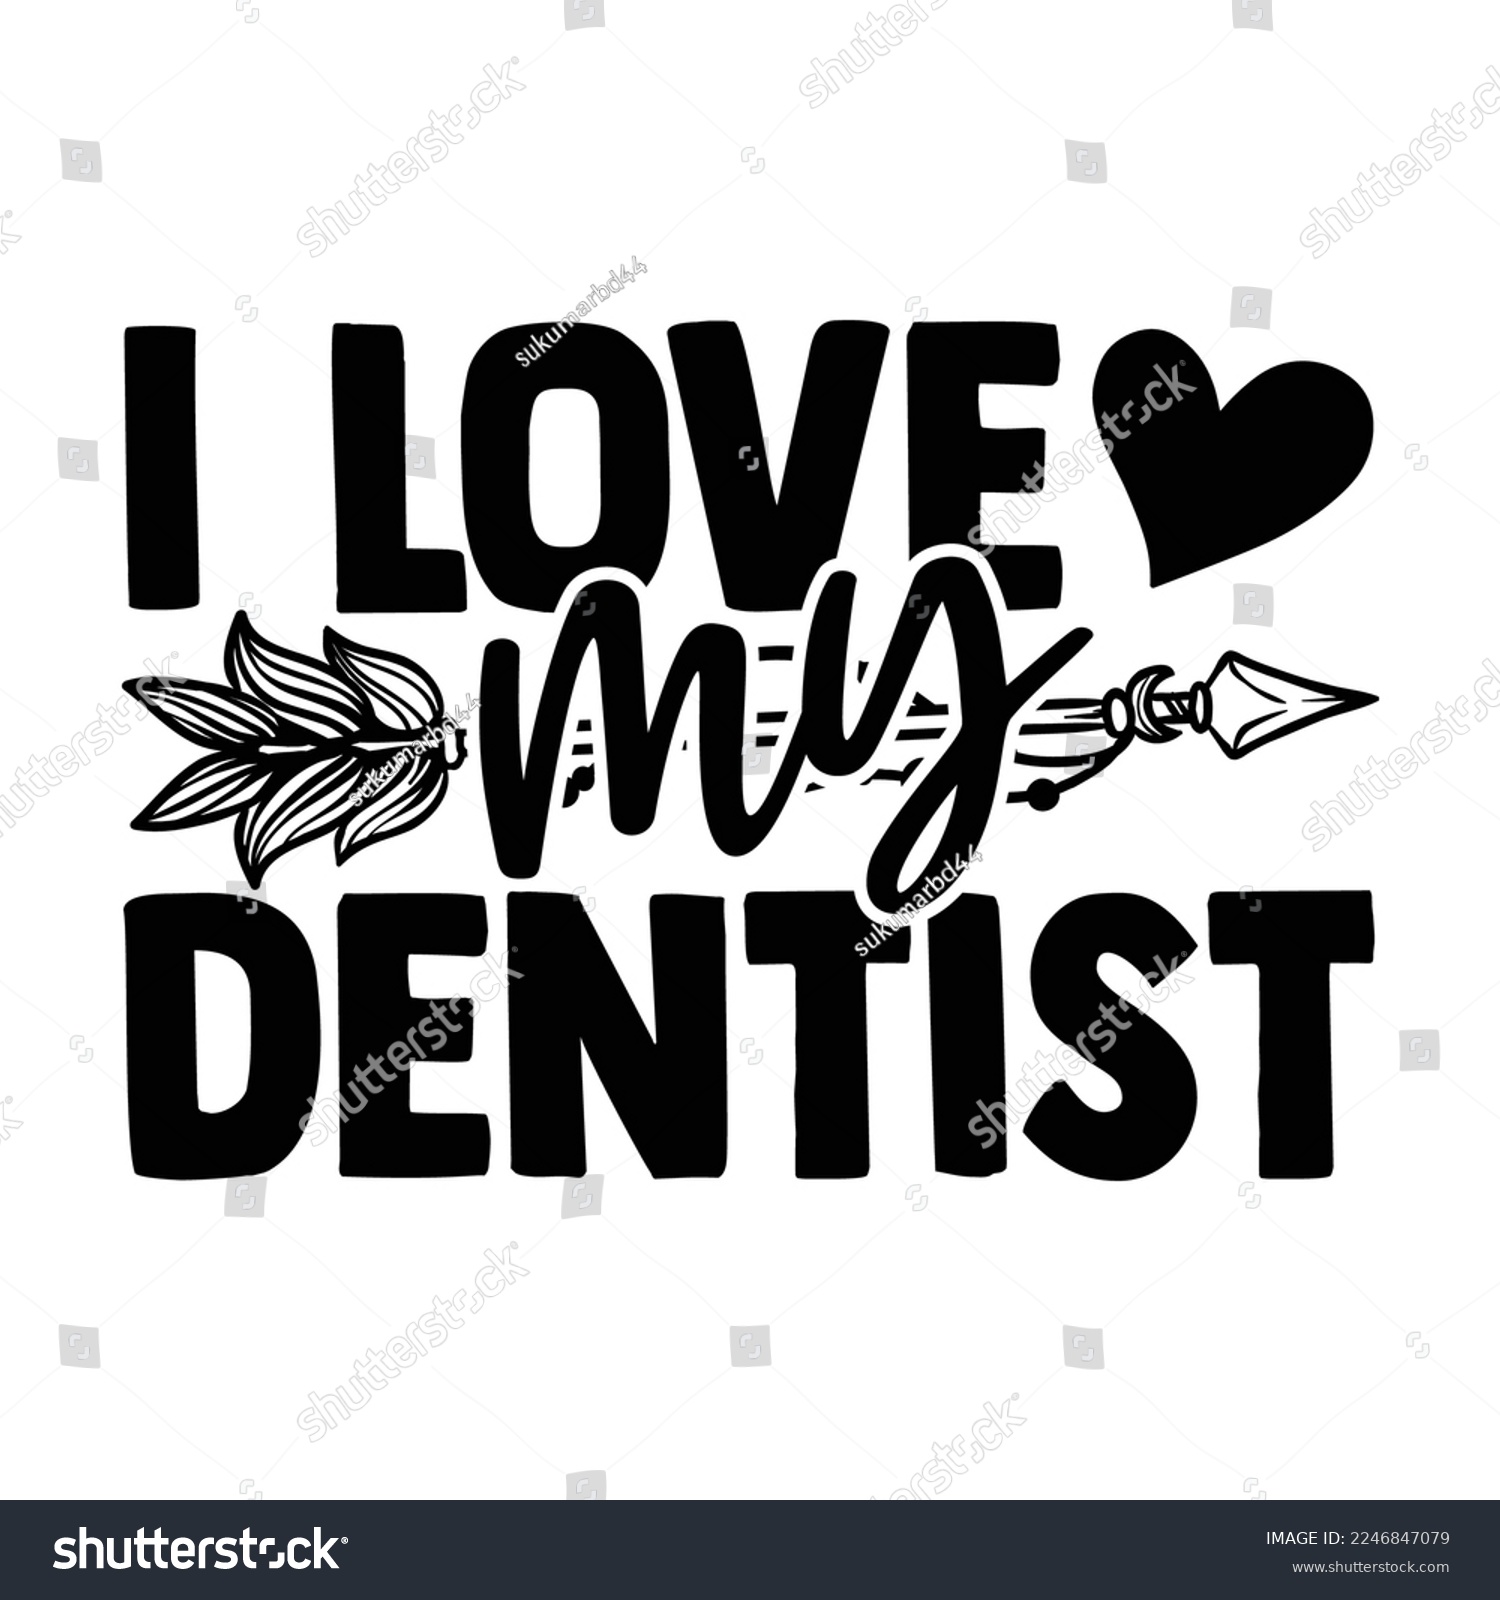 SVG of I Love My Dentist - Dentist T-shirt Design, Conceptual handwritten phrase craft SVG hand lettered, Handmade calligraphy vector illustration, or Cutting Machine, Silhouette Cameo, Cricut svg